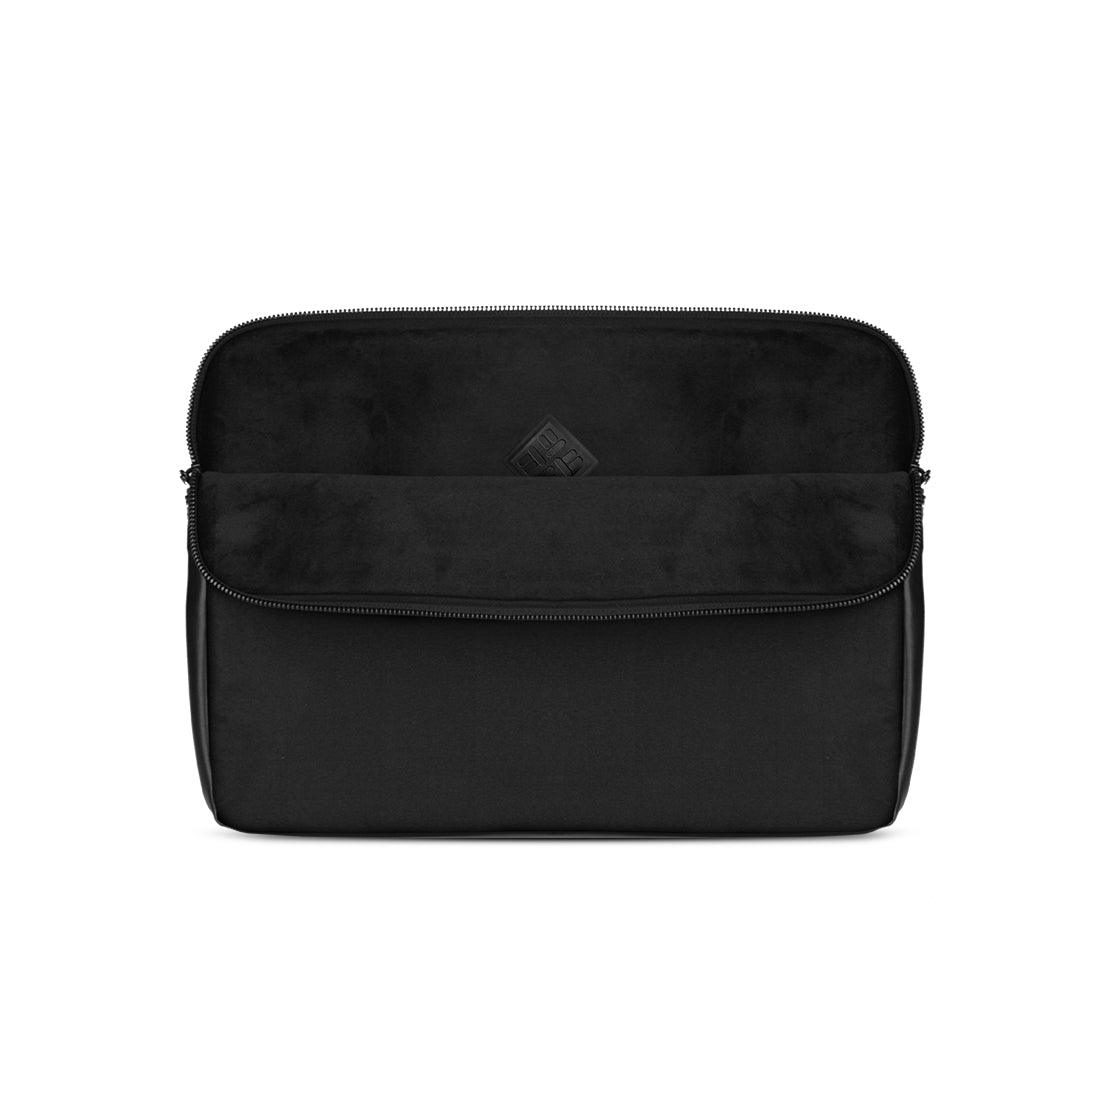 Laptop Sleeve low poly gymnastic